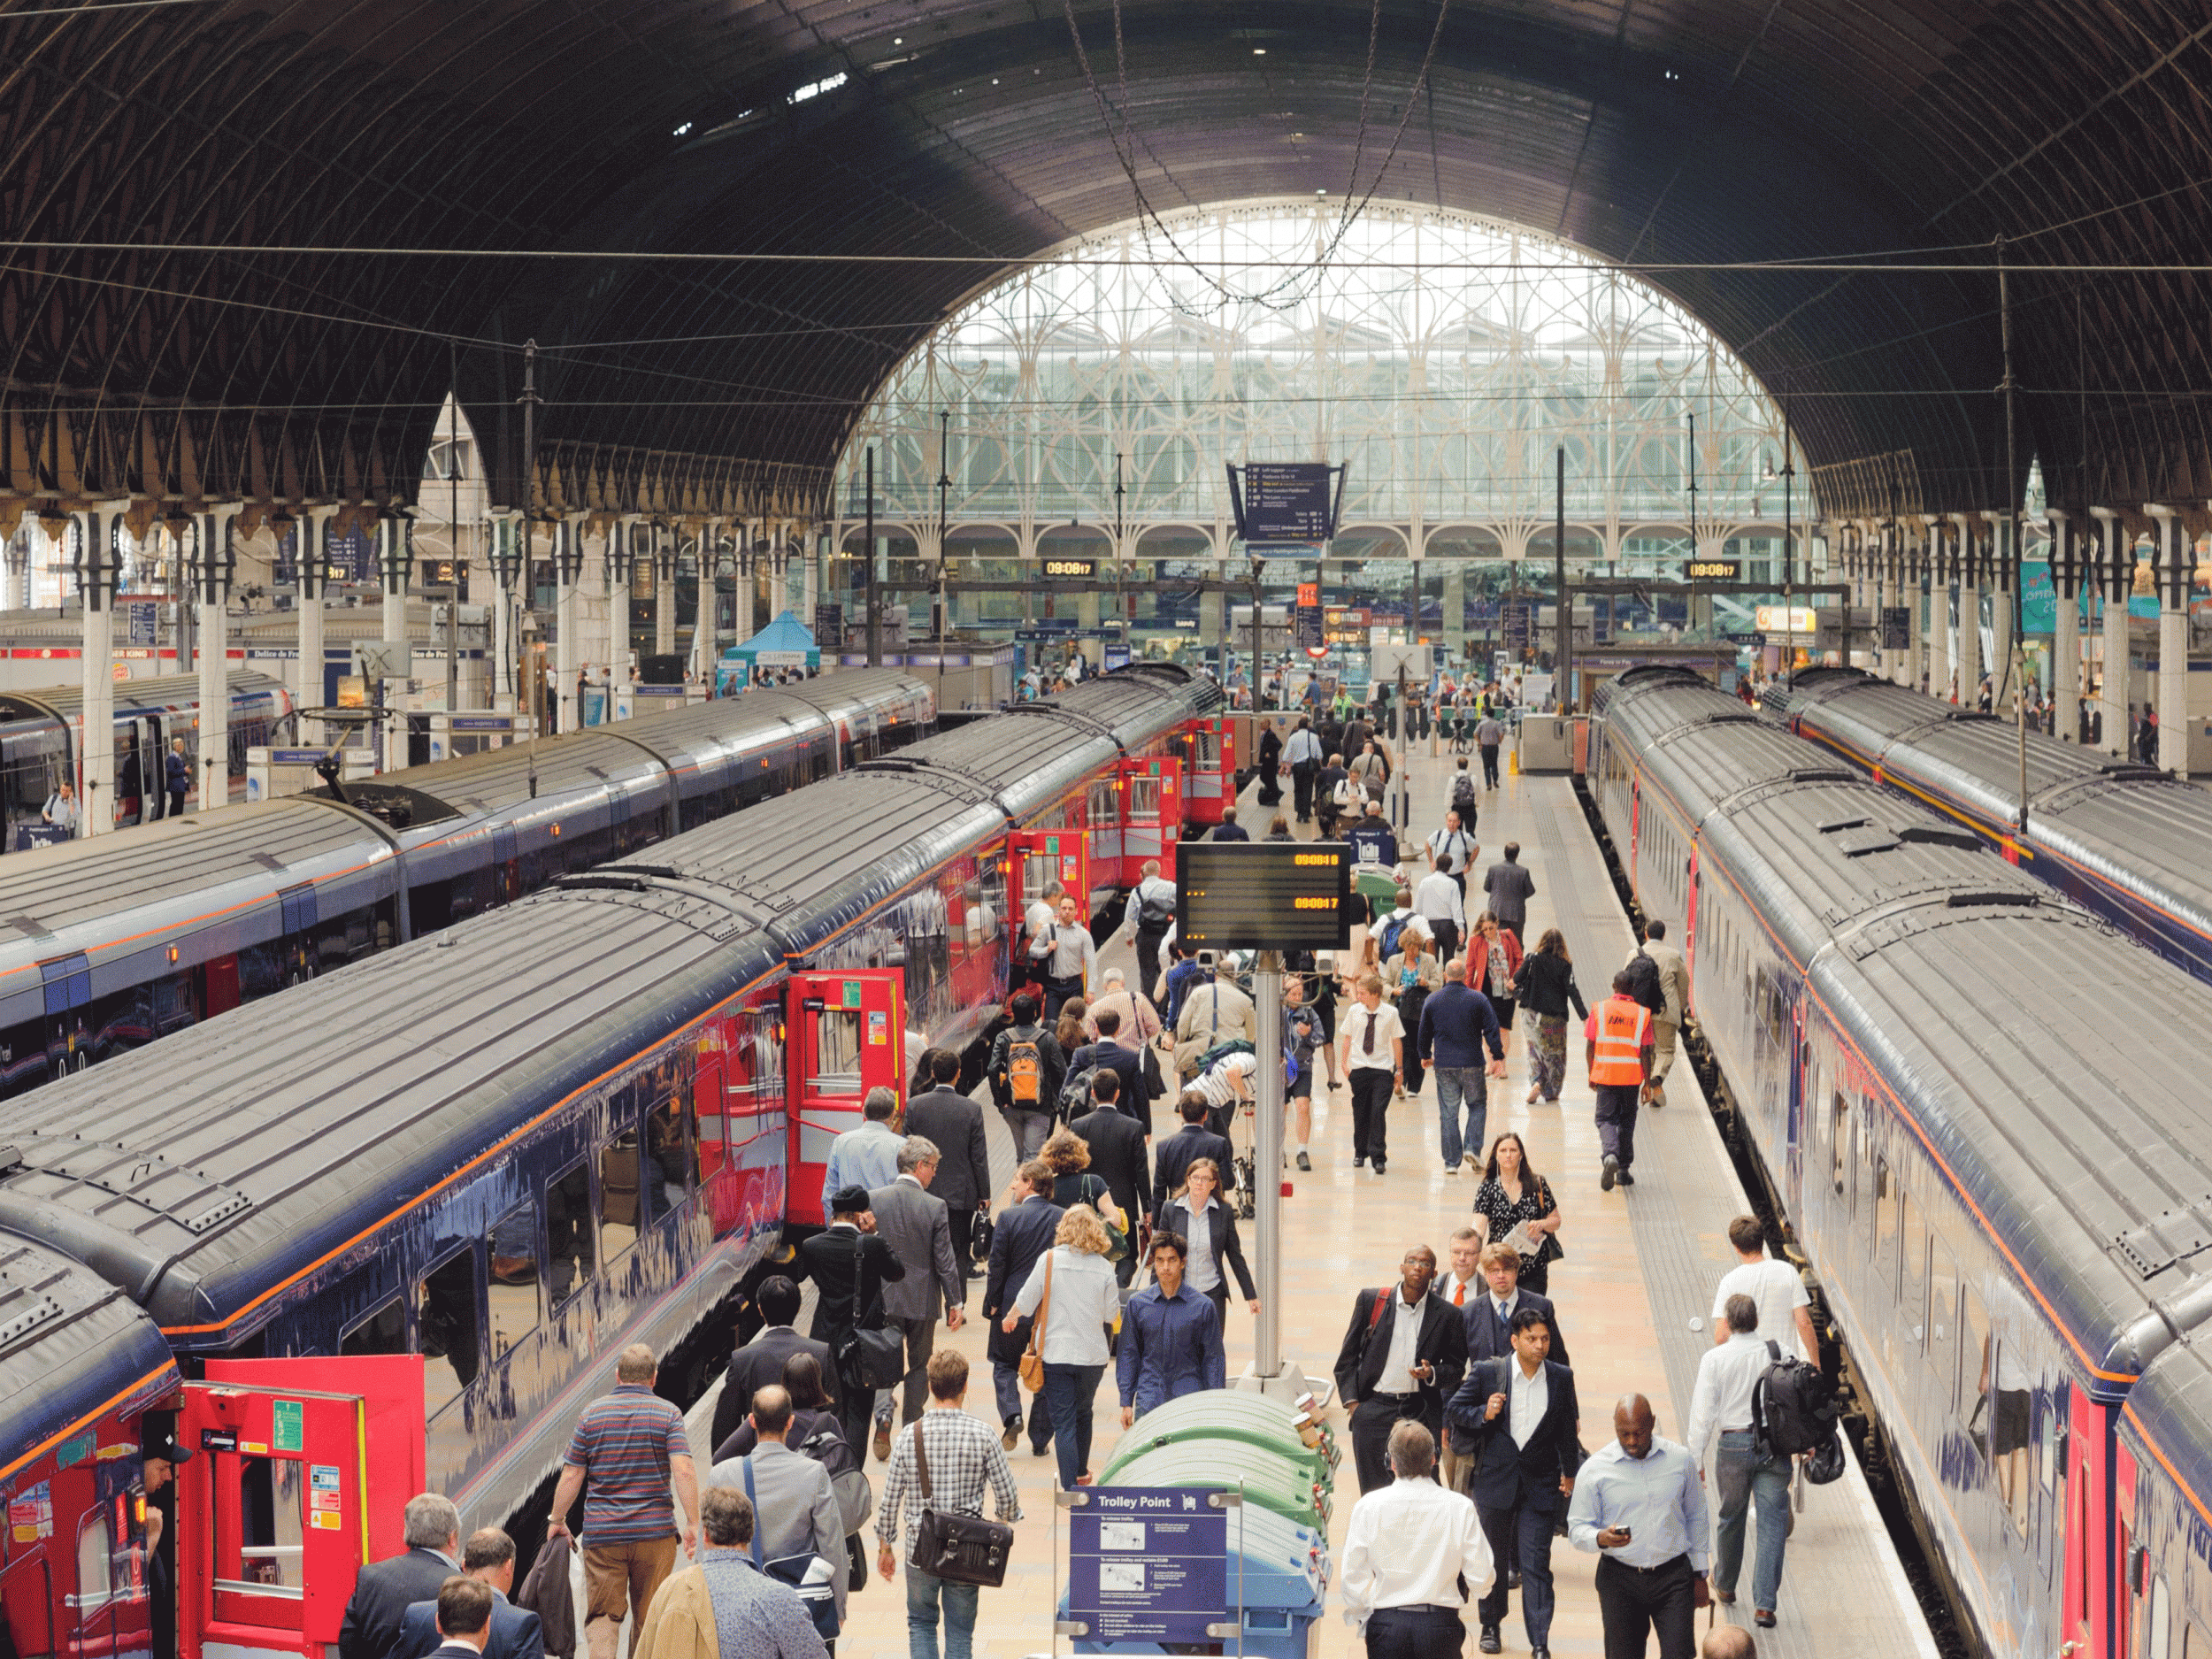 Crowds of commuters at rush hour in Paddington Station, which saw some of the most overbooked trains in the UK